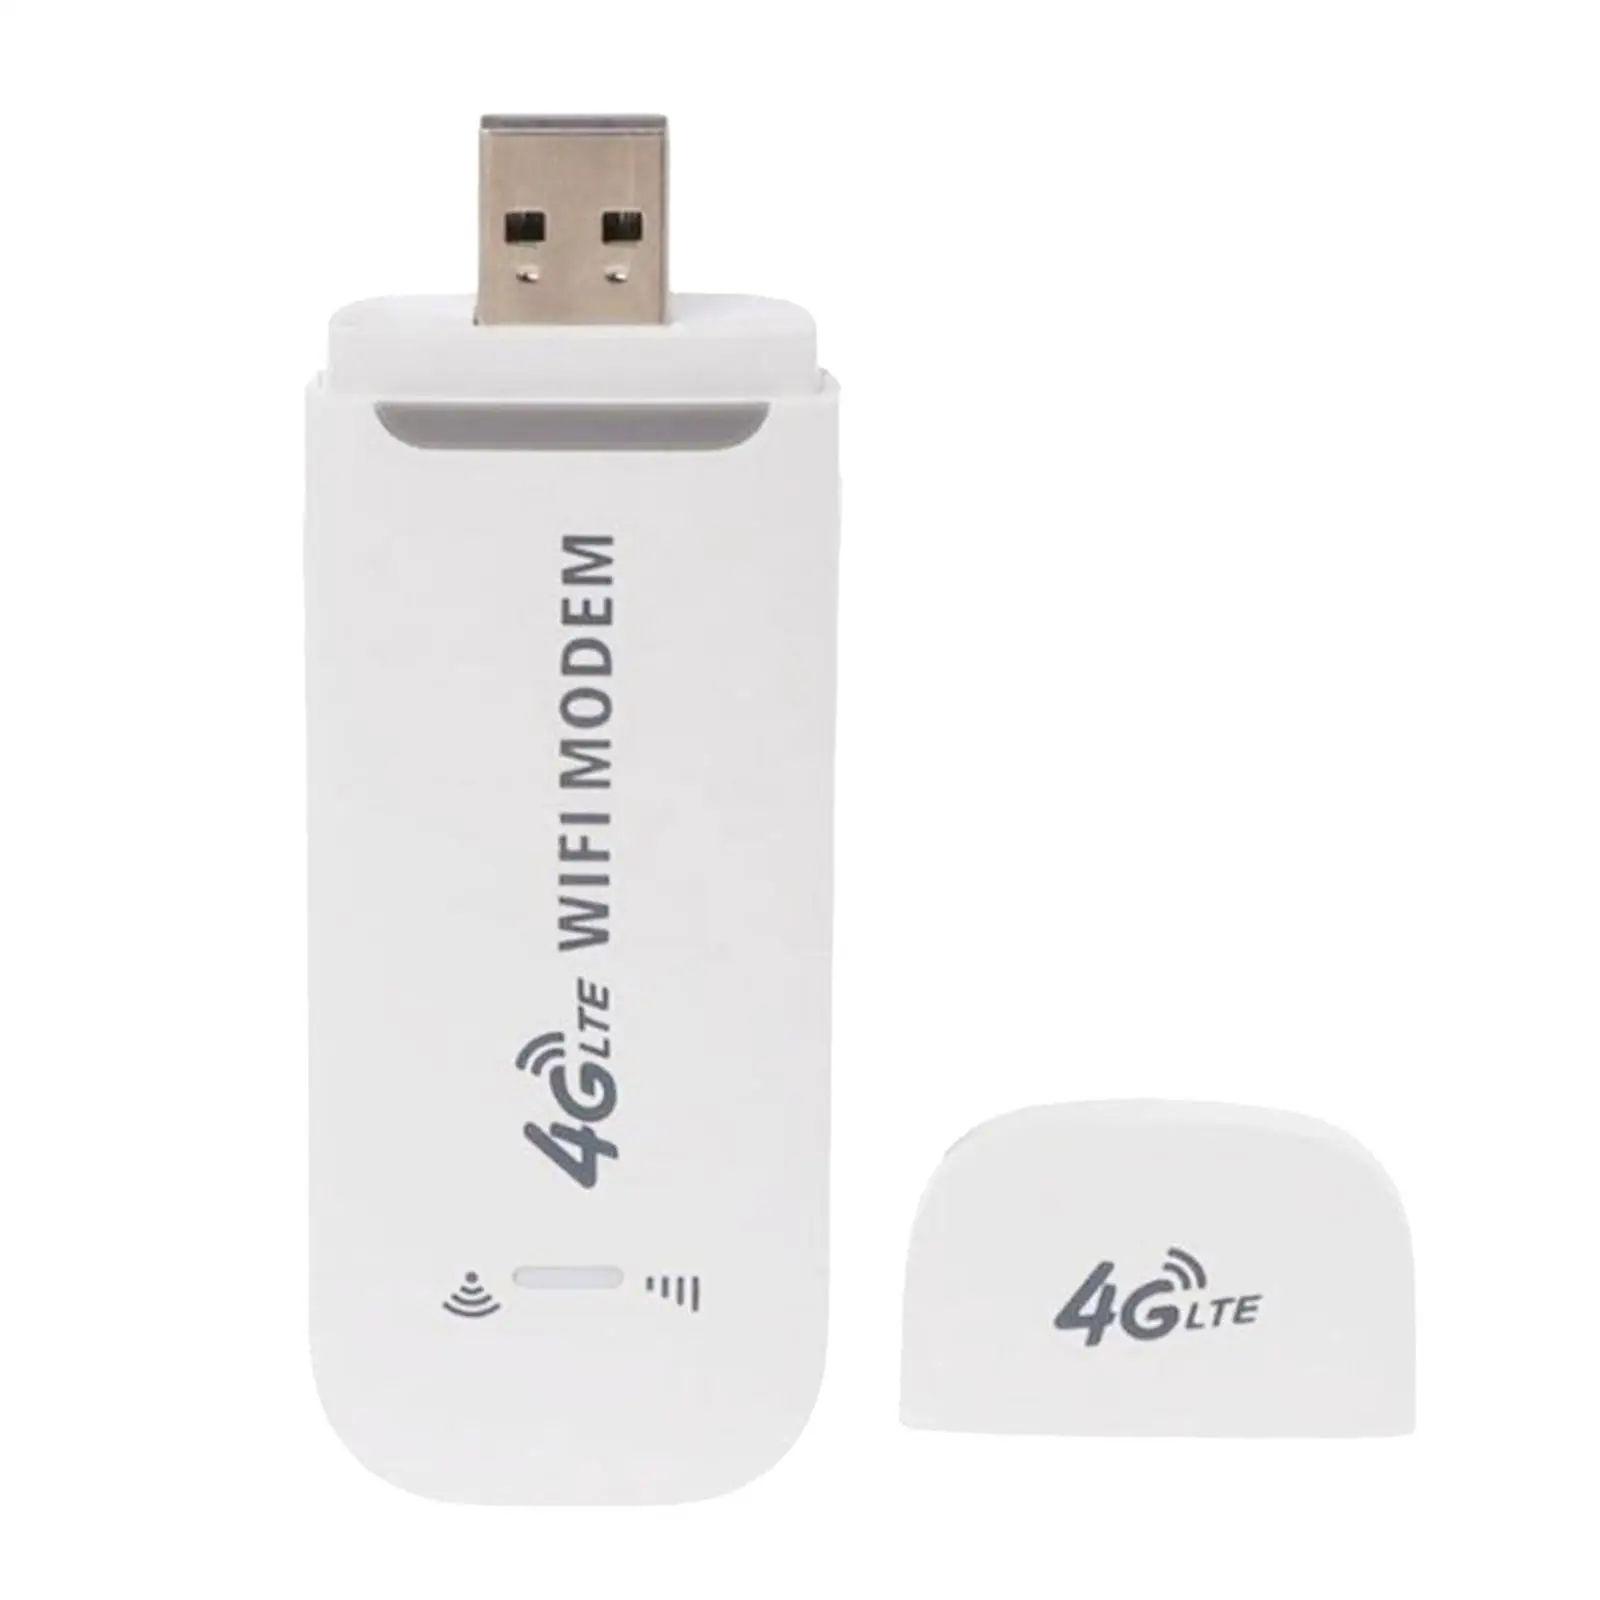 4G LTE USB Modem Dongle Wireless Router Stick Network Card for Desktop PC